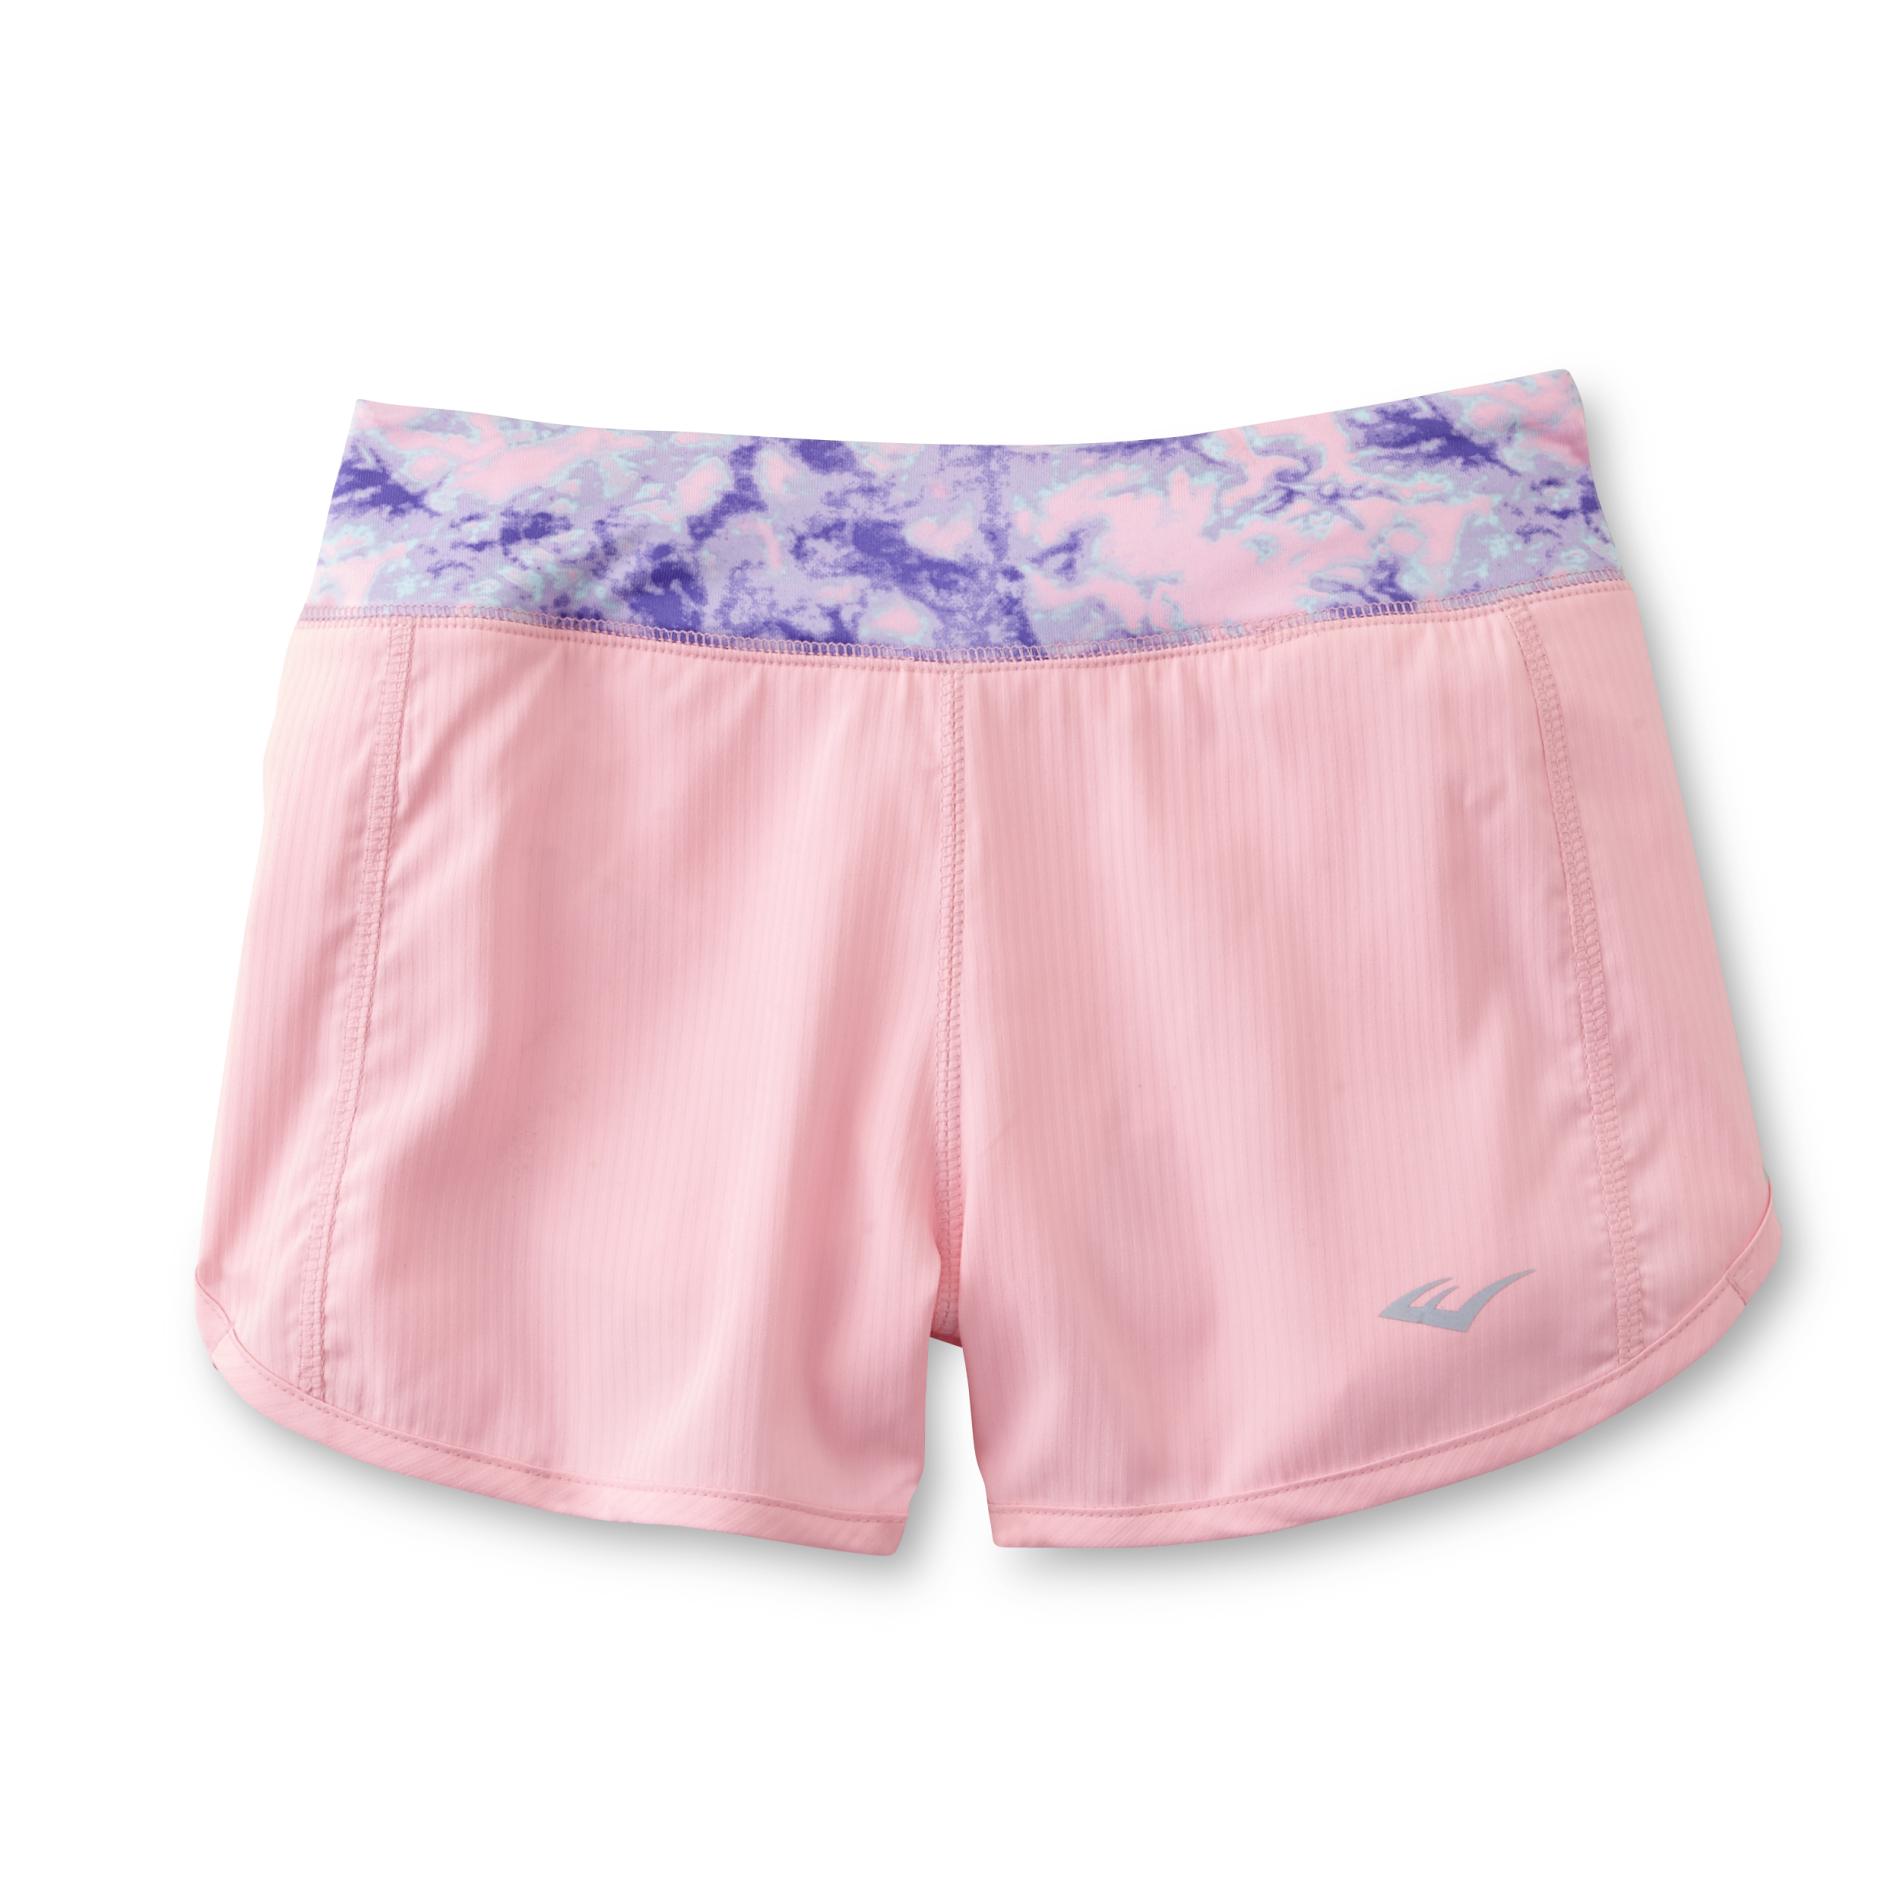 Girl's Running Shorts - Tie-Dyed